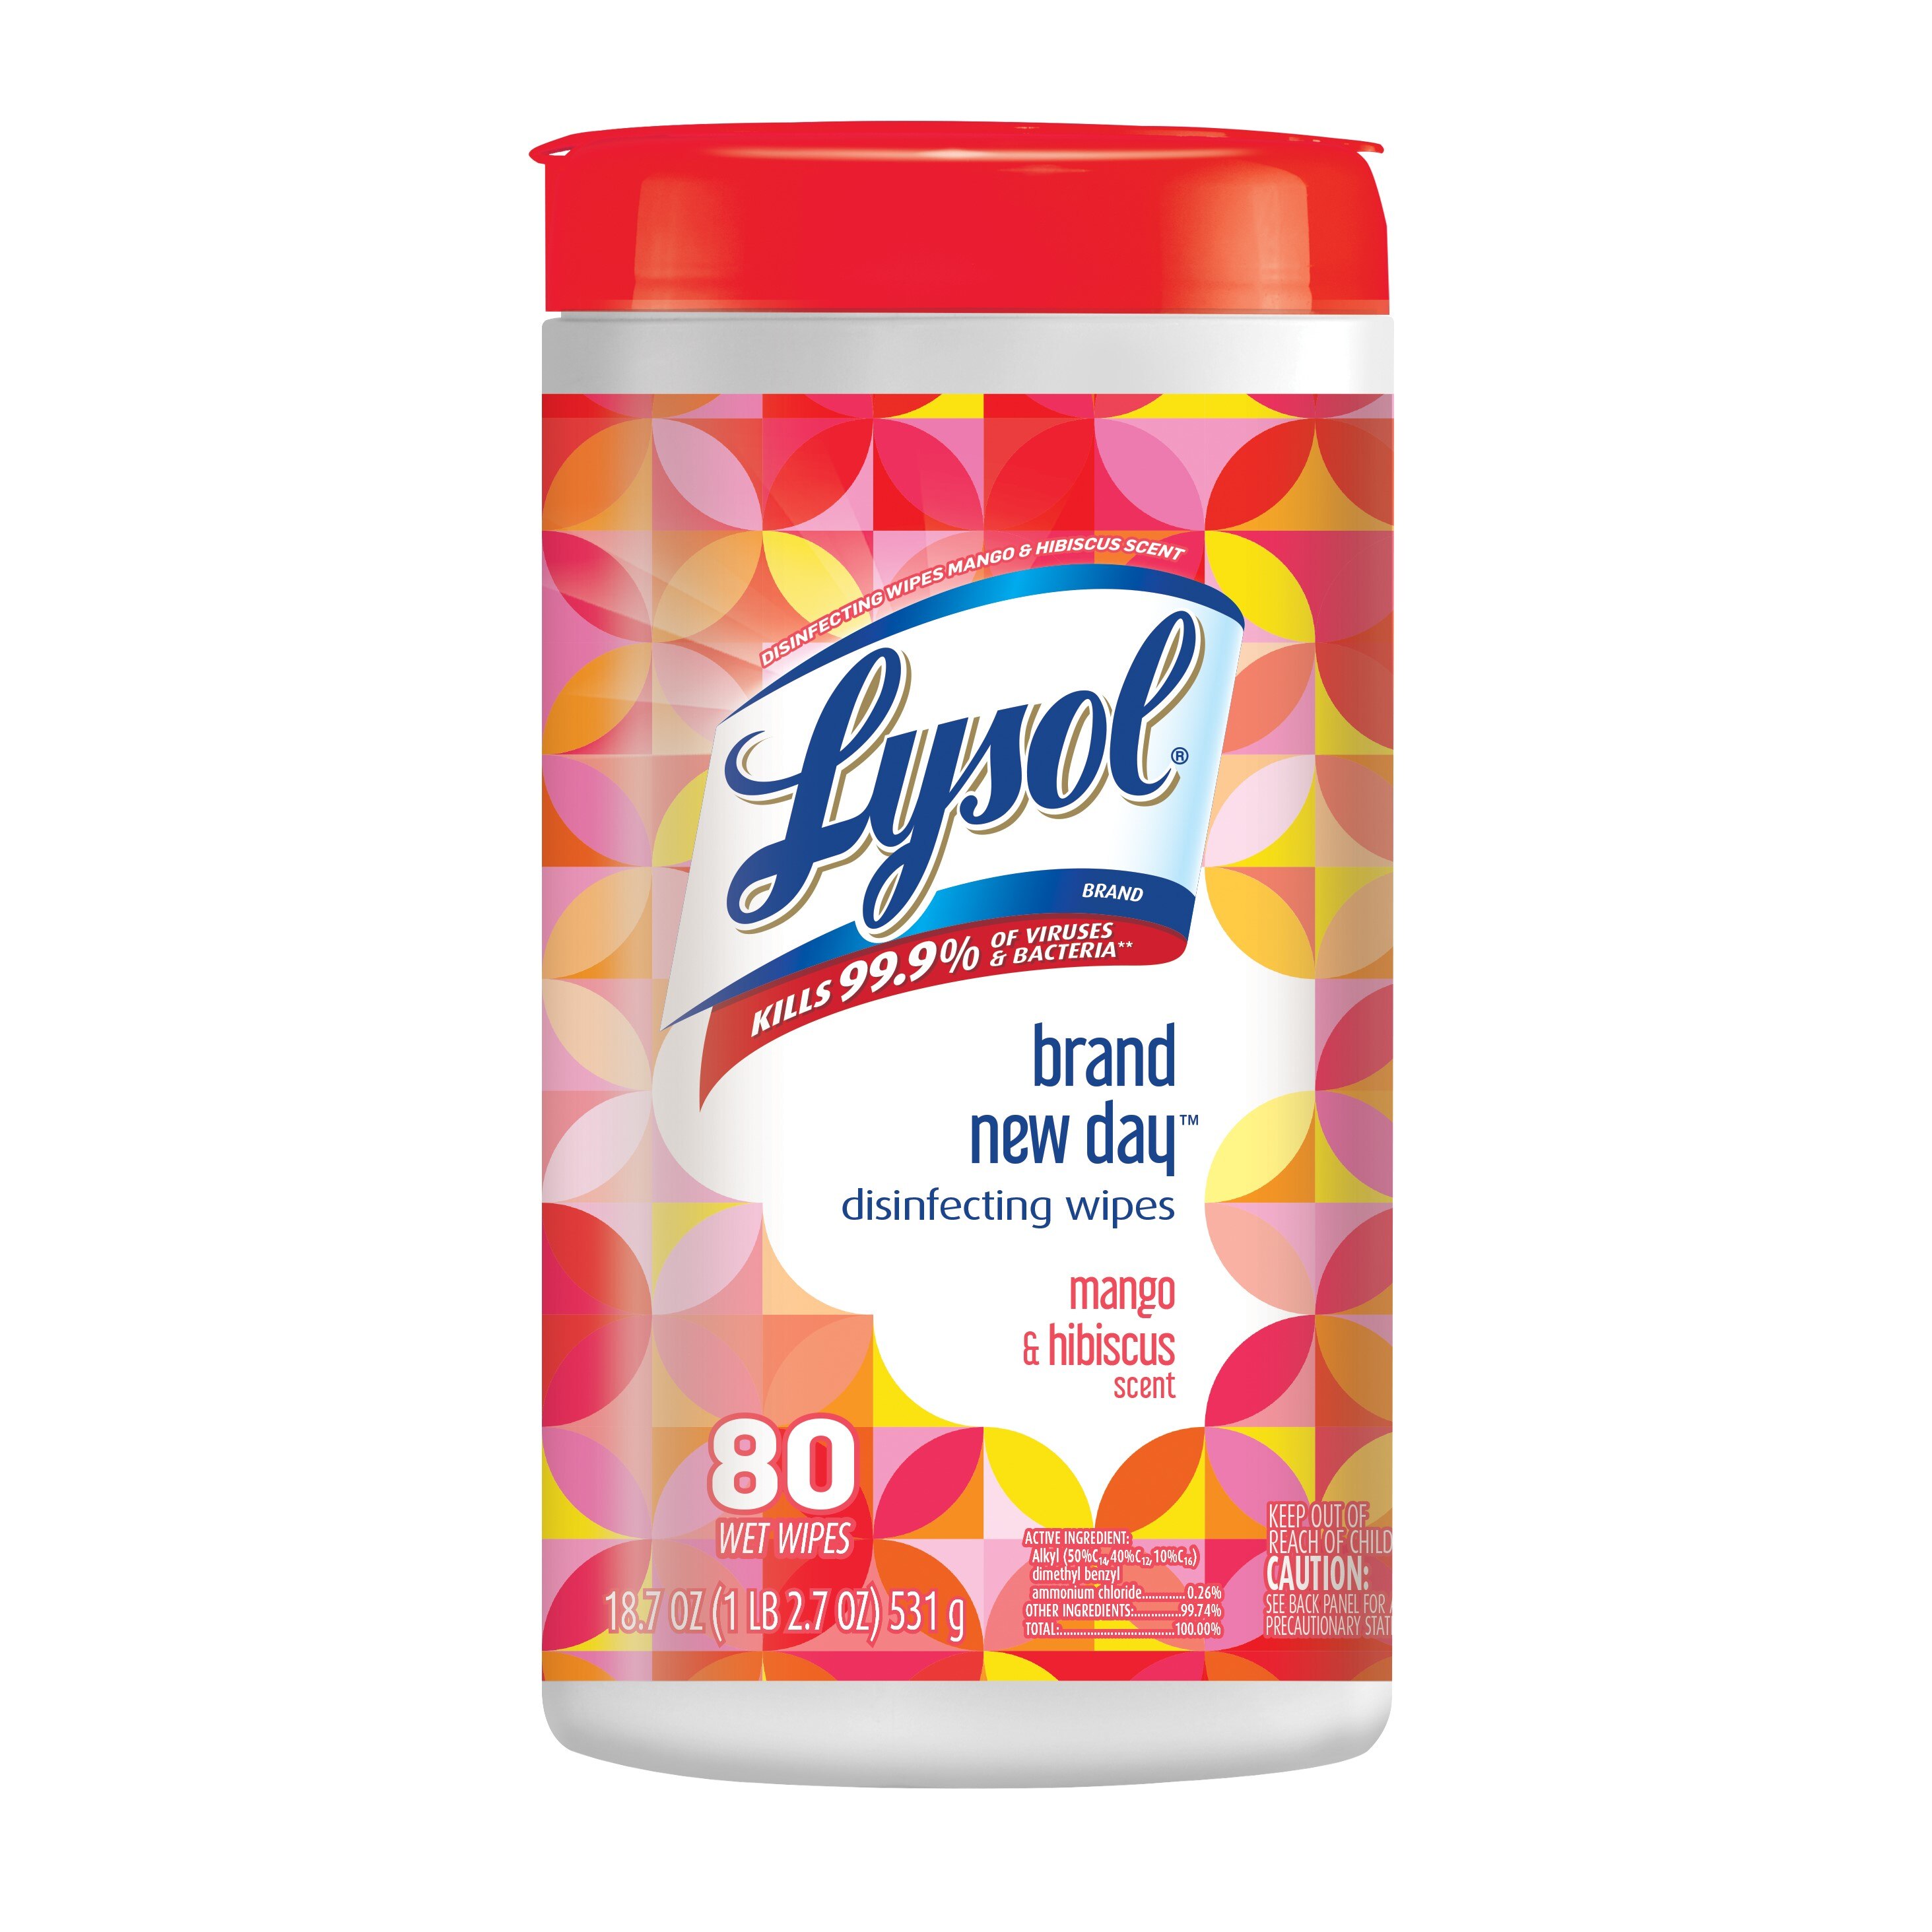 Lysol Brand New Day Disinfecting Wipes, Mango & Hibiscus, 80 CT